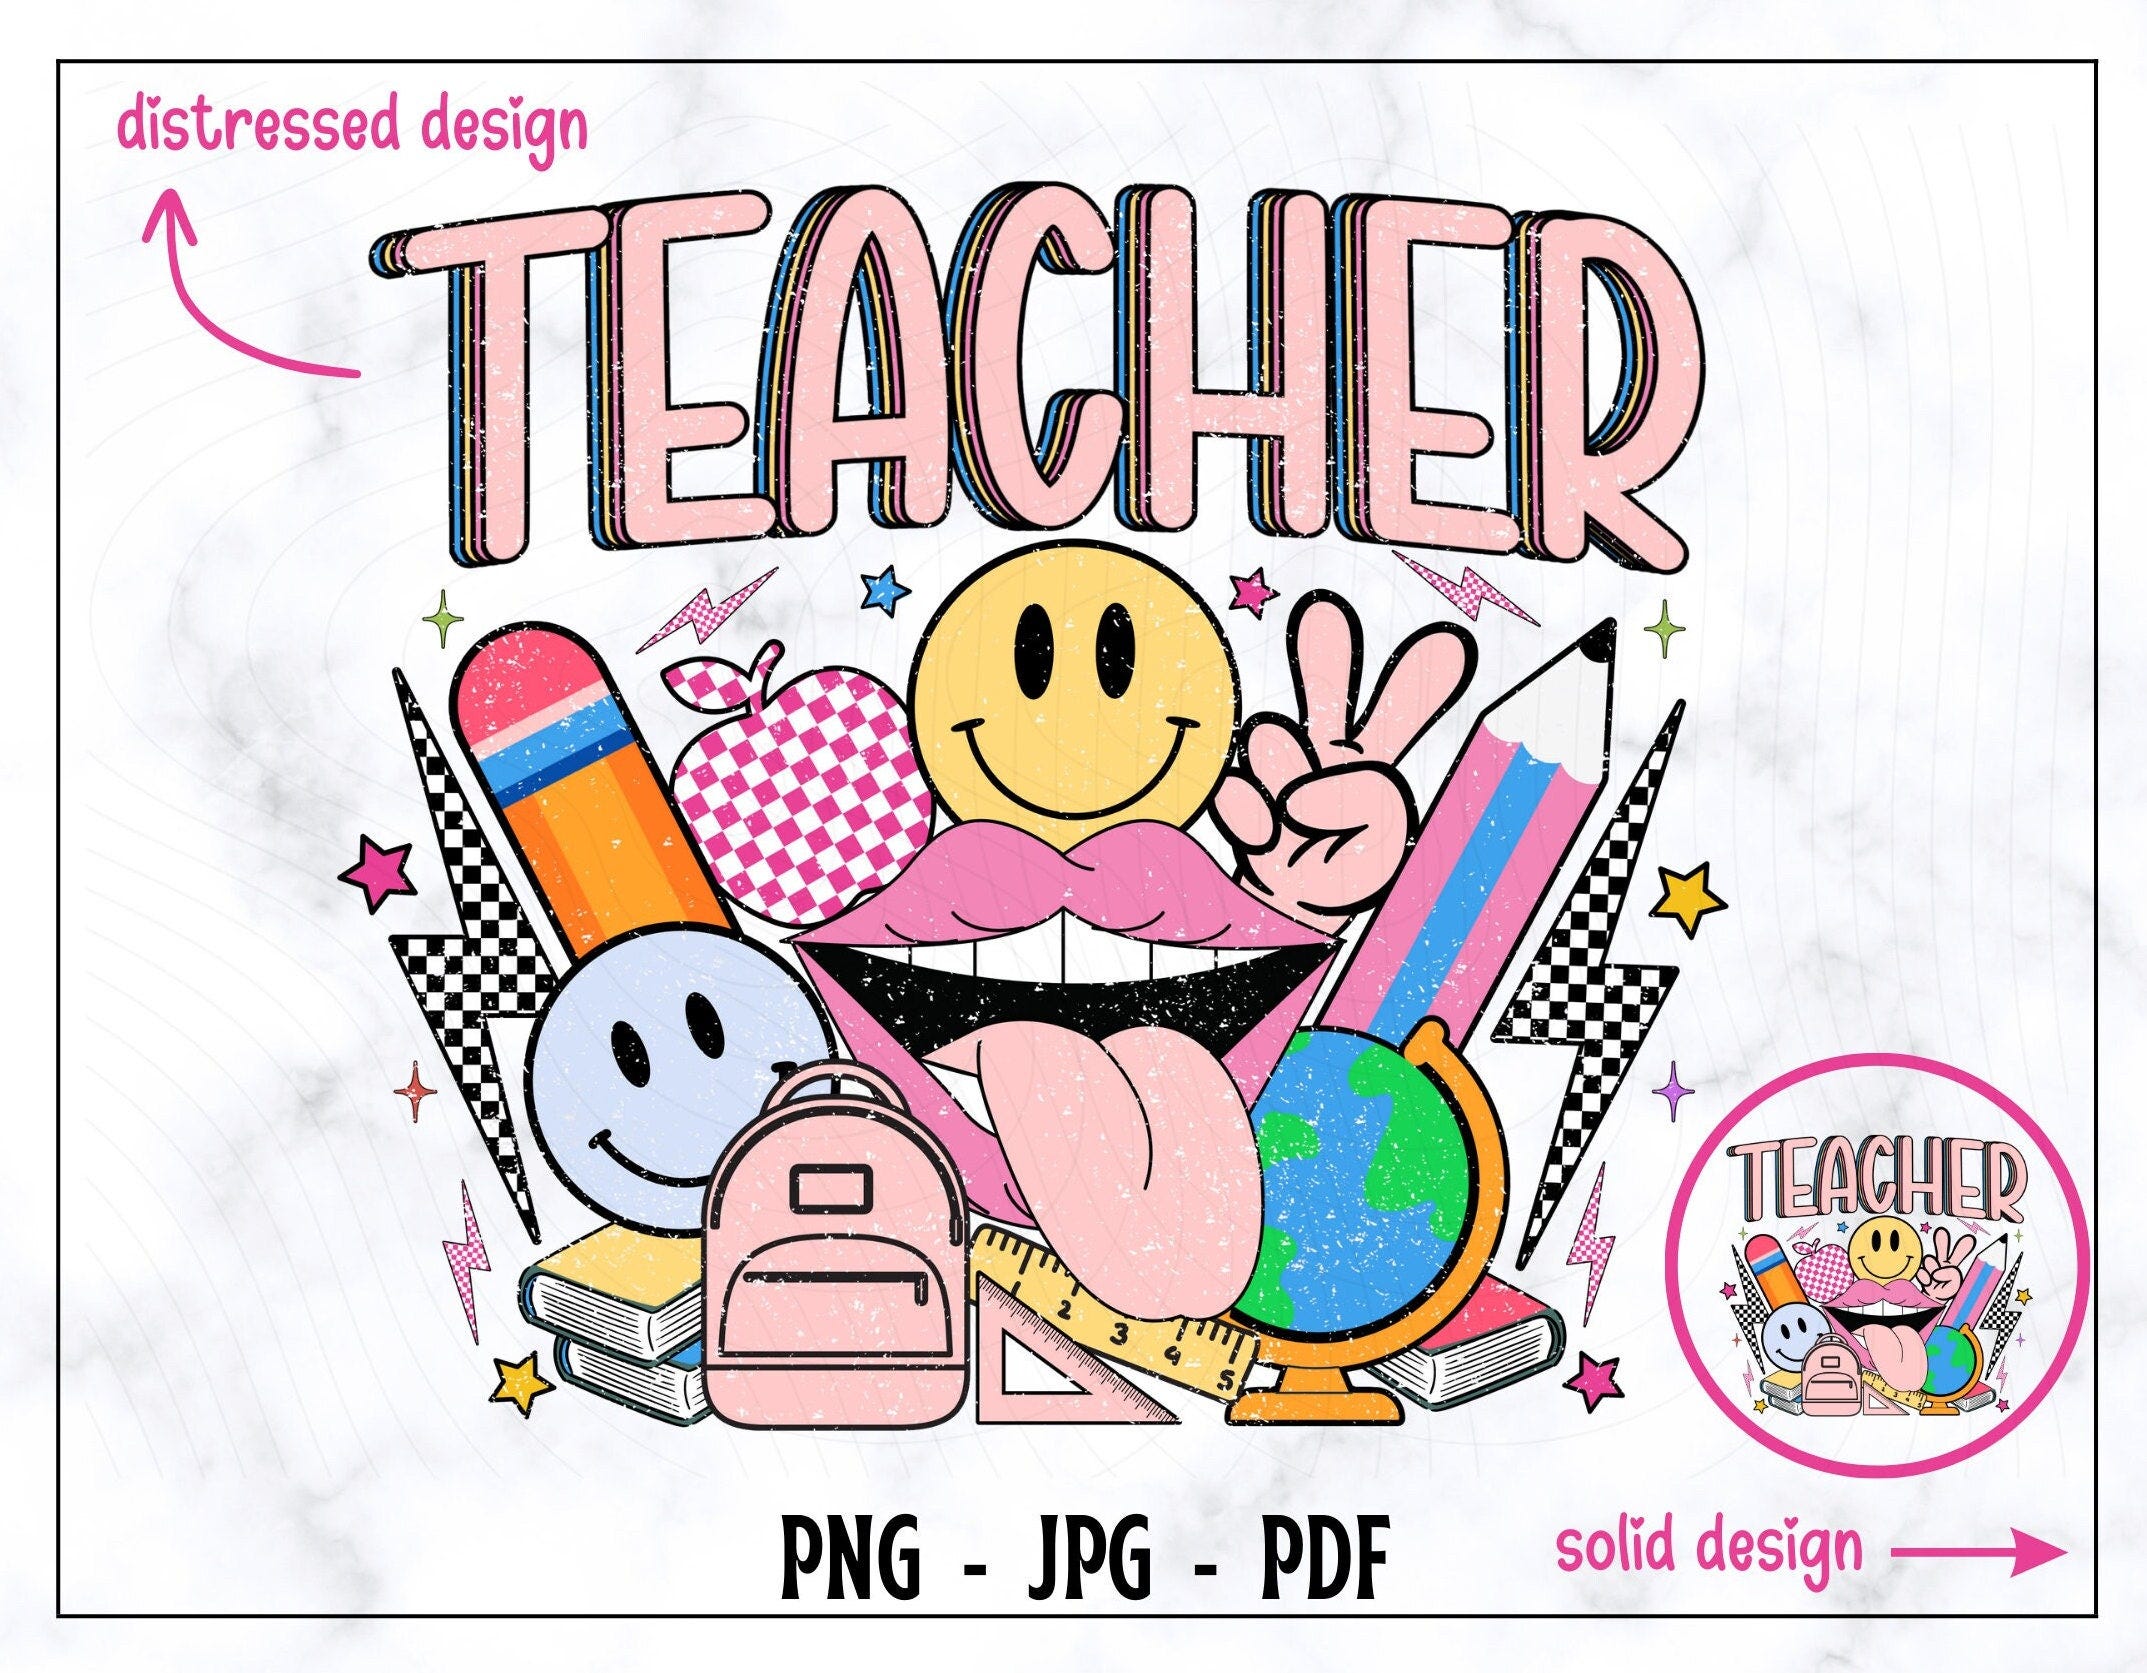 Retro Teacher PNG, Teacher PNG, Teacher Shirt PNG, Back To School Png, Teacher Life Png, Funny Teacher Shirt Png, Cool Teachers Shirt Png